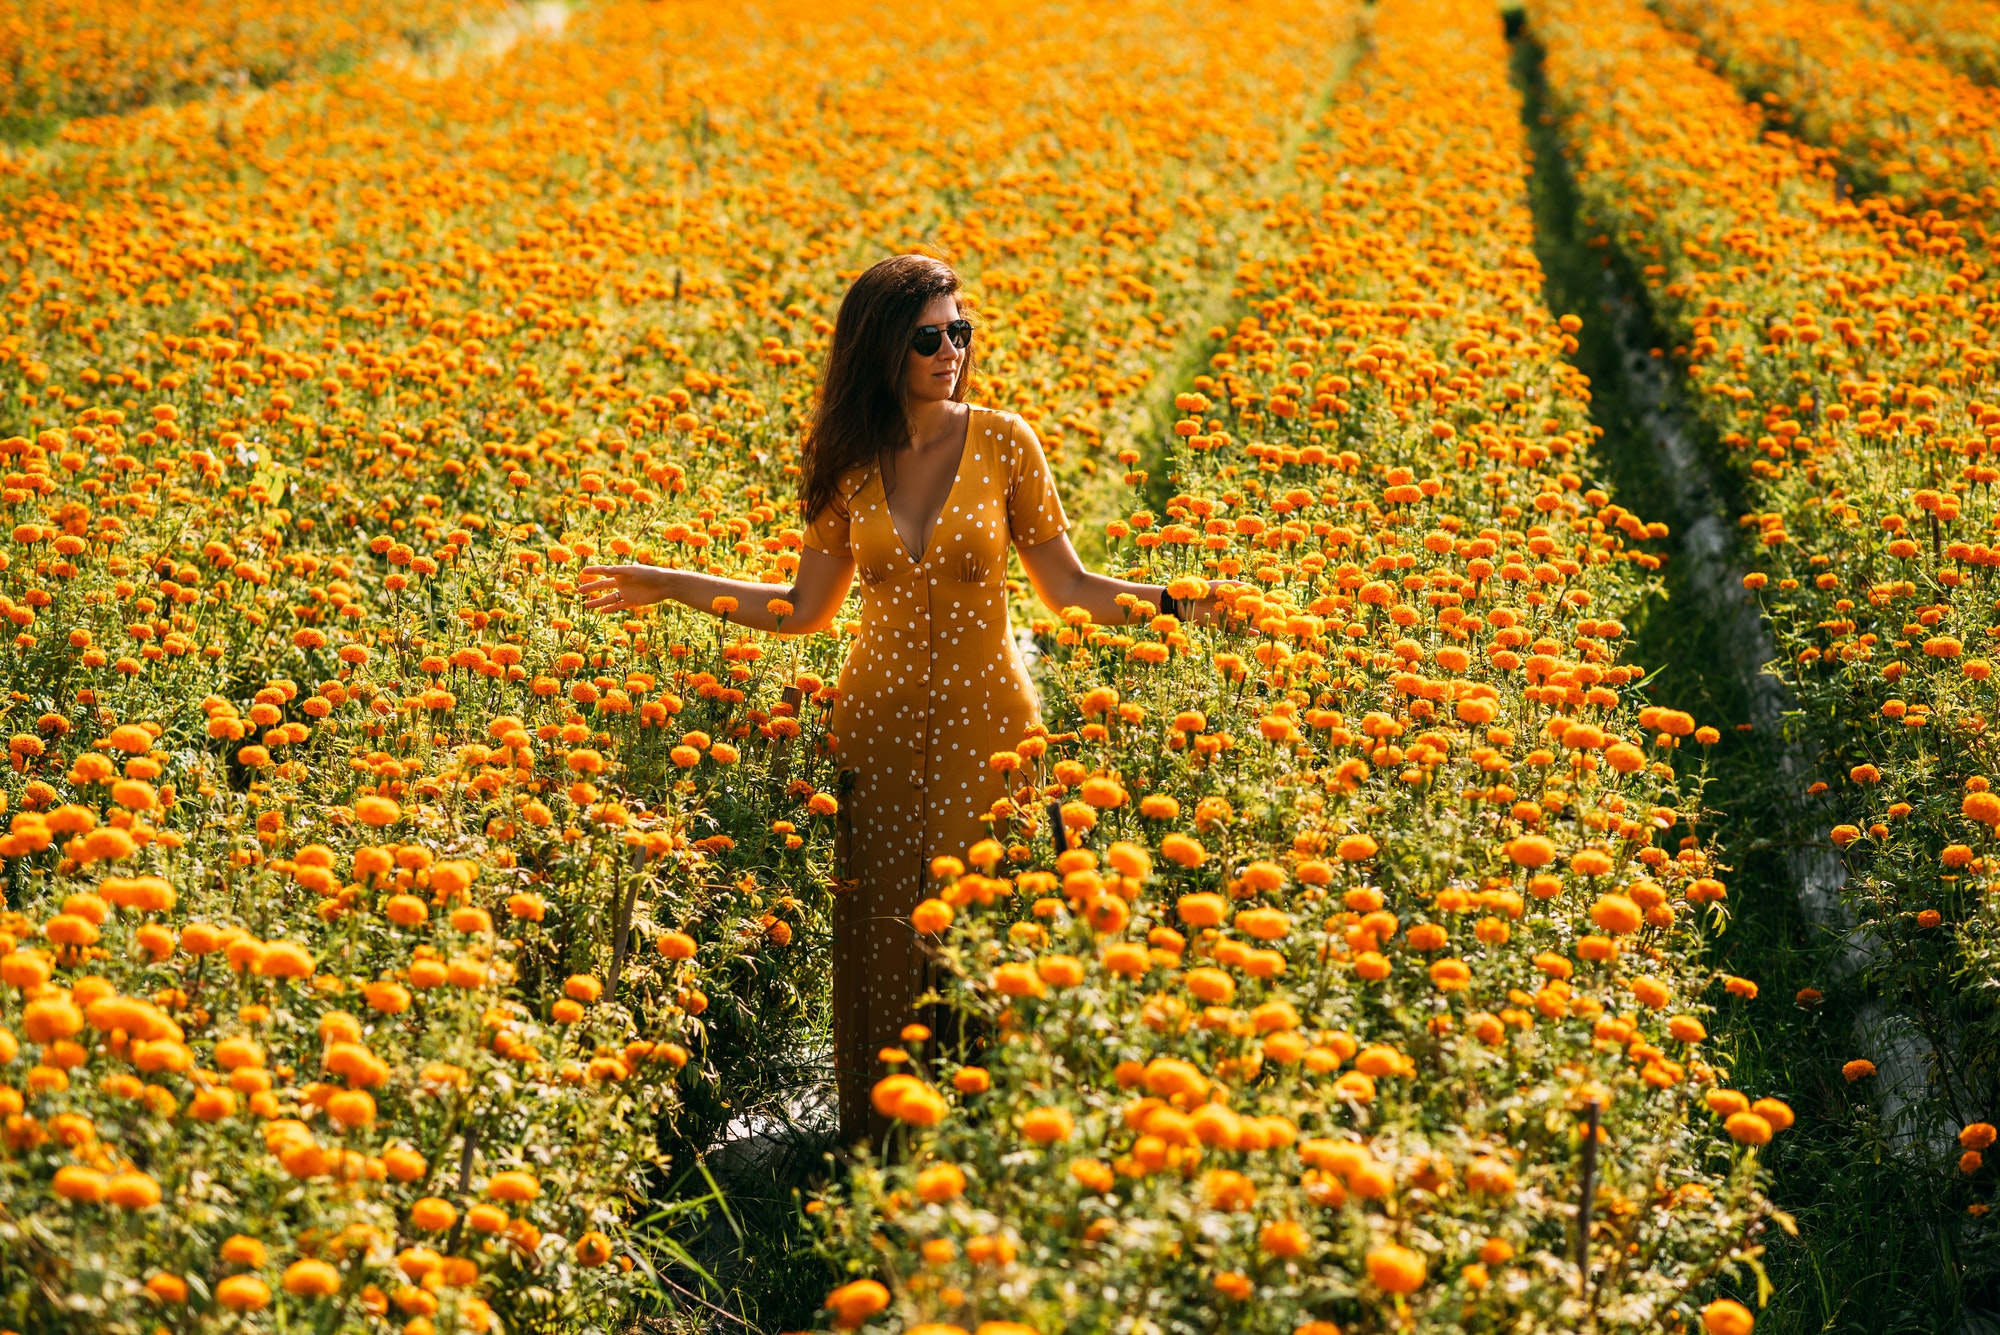 Beautiful girl on a flower field. A girl in a yellow dress among flowers